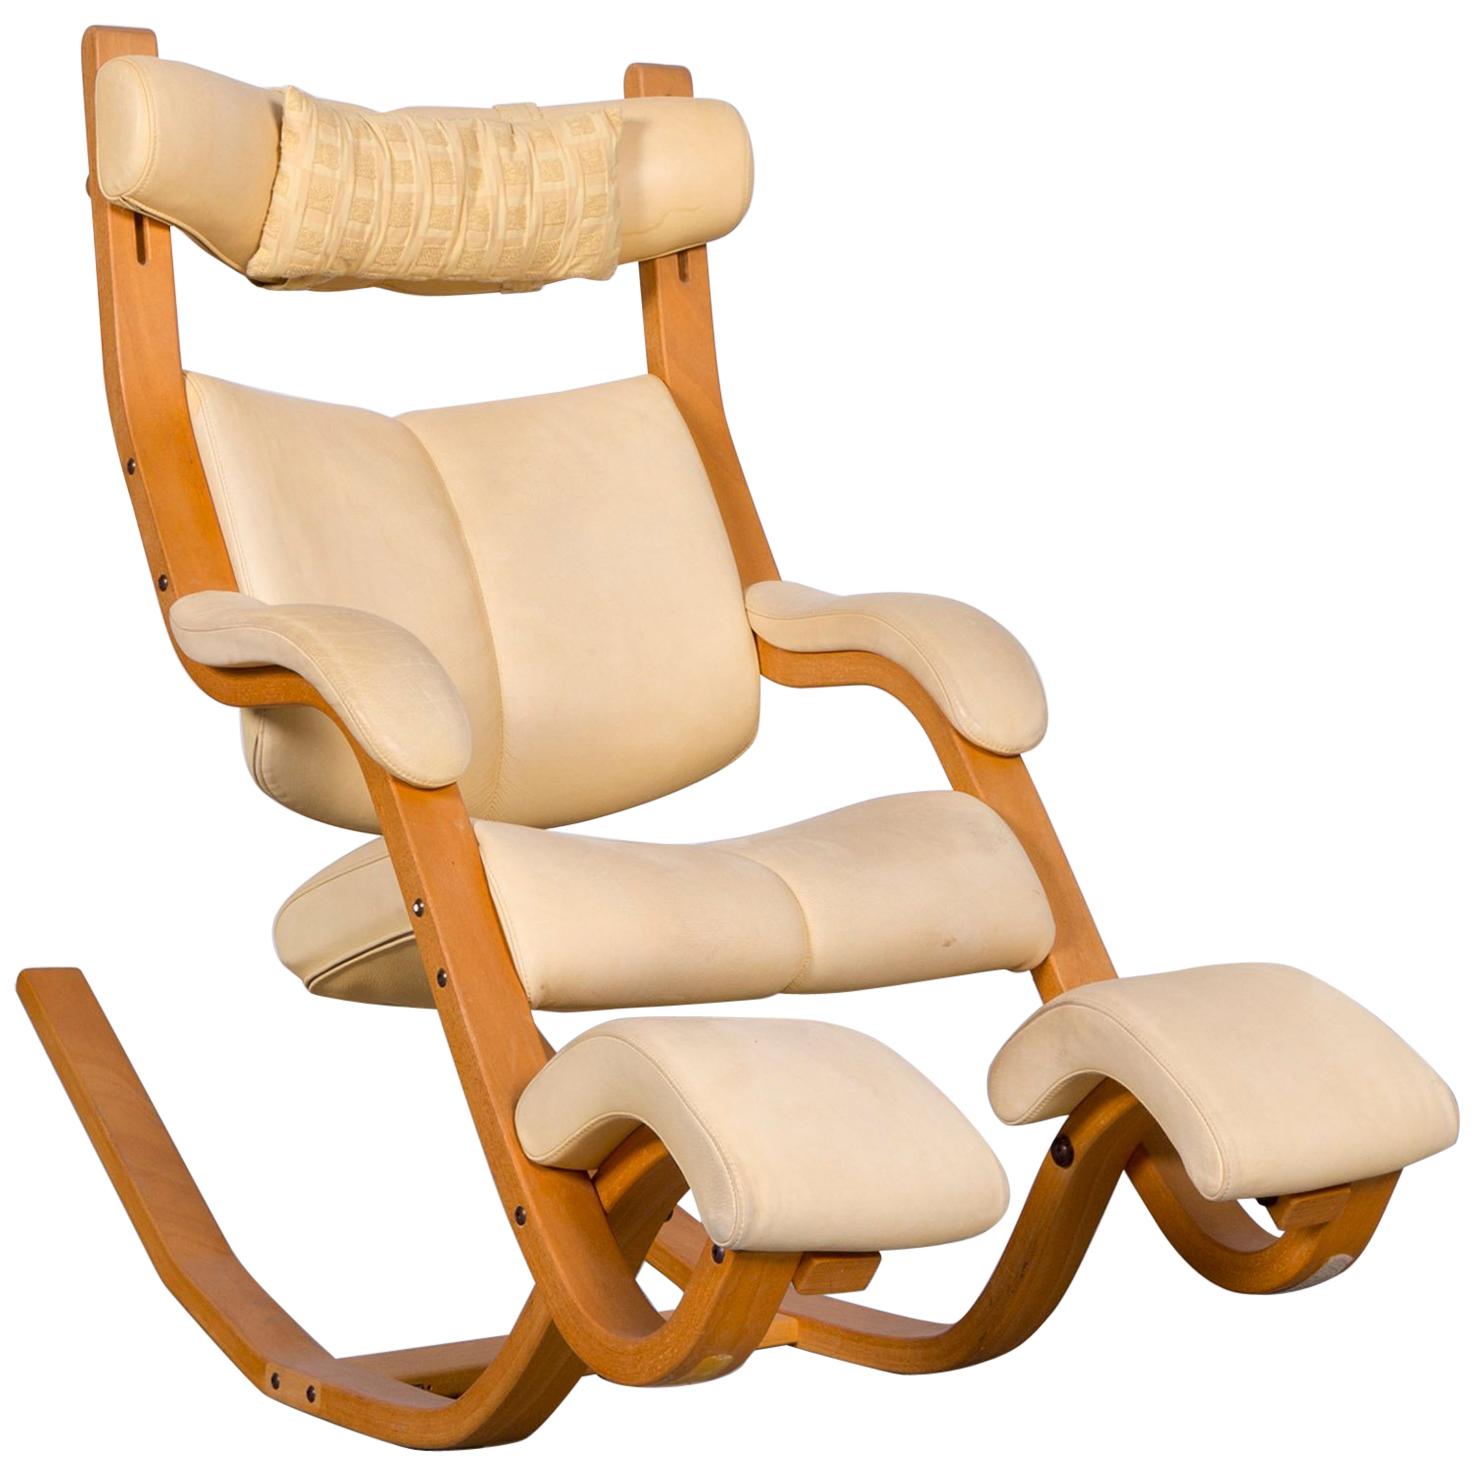 Stokke Gravity Balans Designer Leather Chair Rocking Chair Crème For Sale